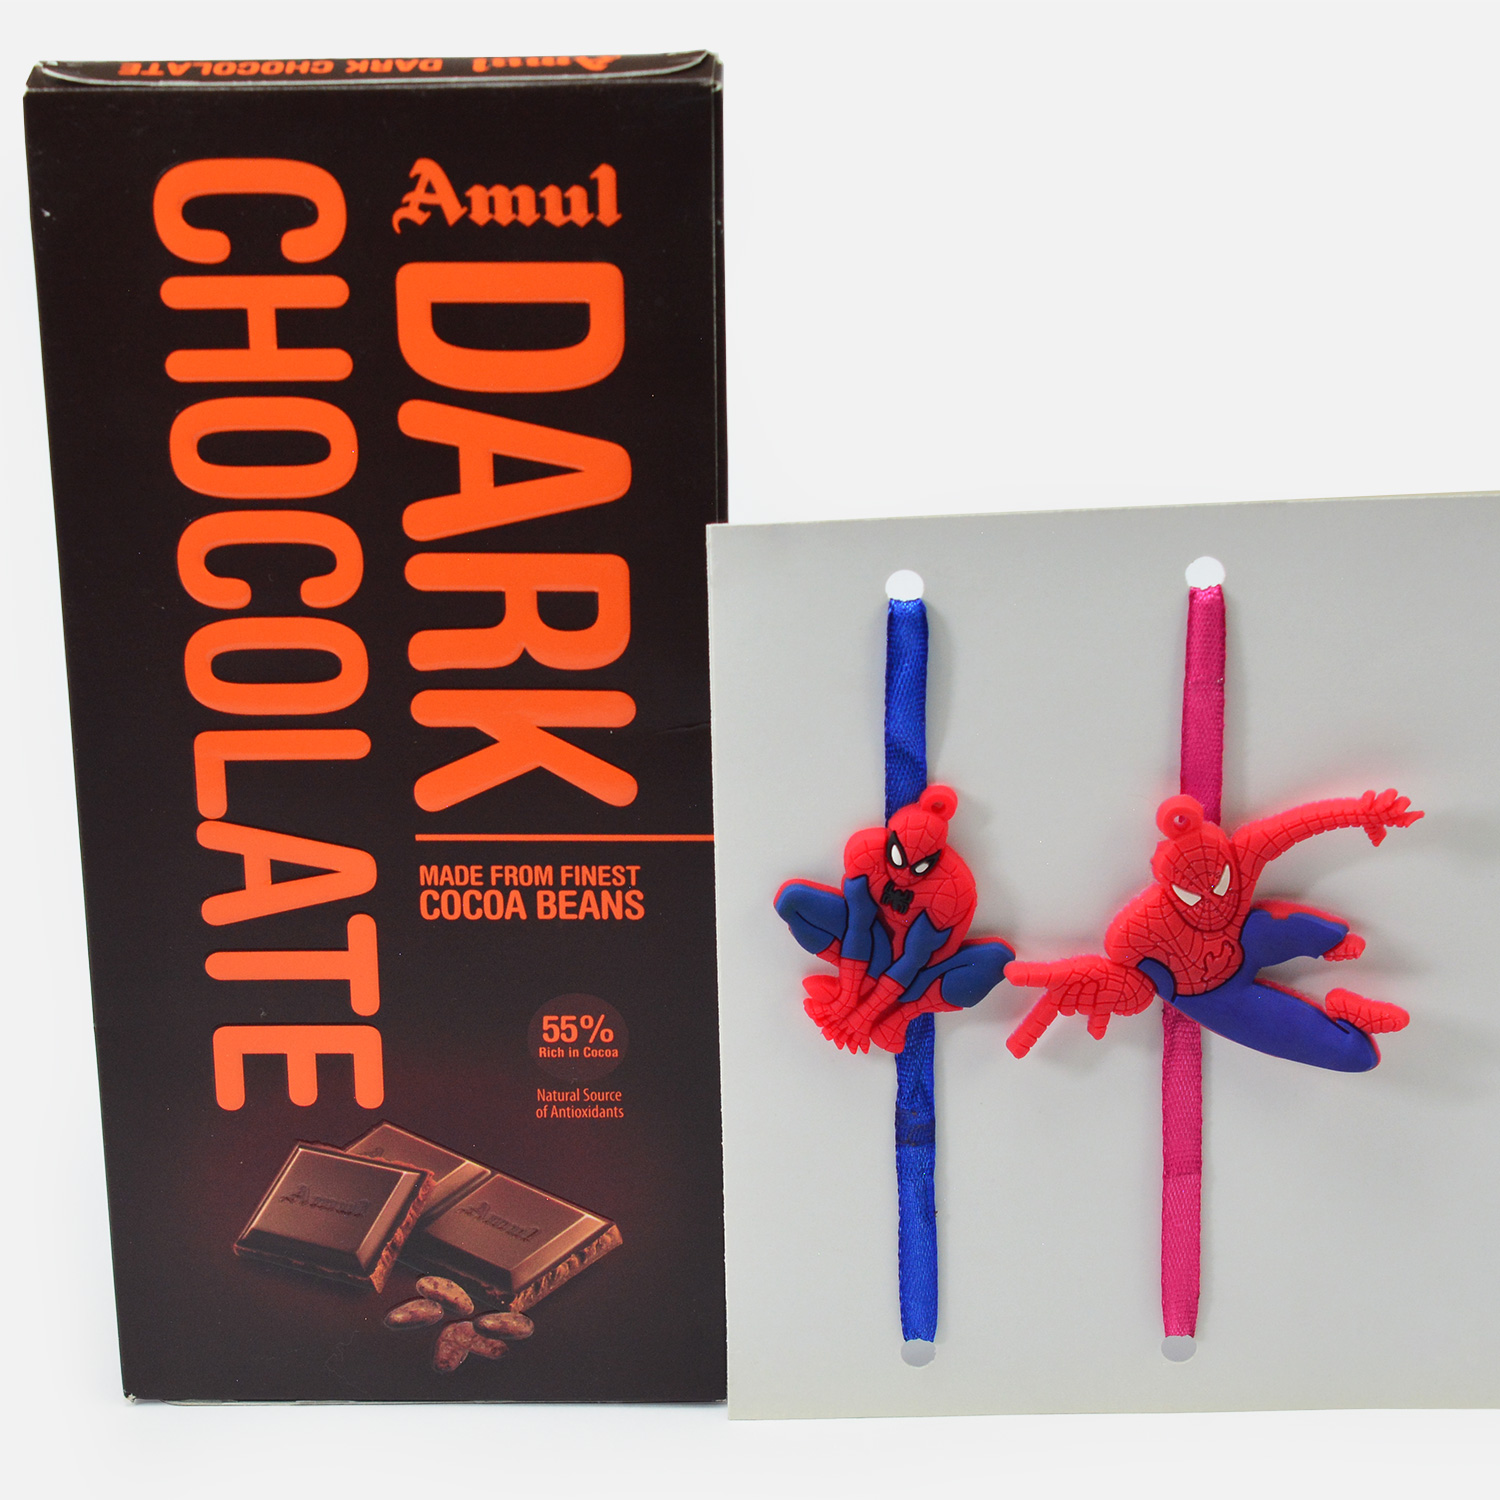 Spider Man Special Two Rakhis for Kids with Delicious Dark Chocolate of Choco Beans By Amul